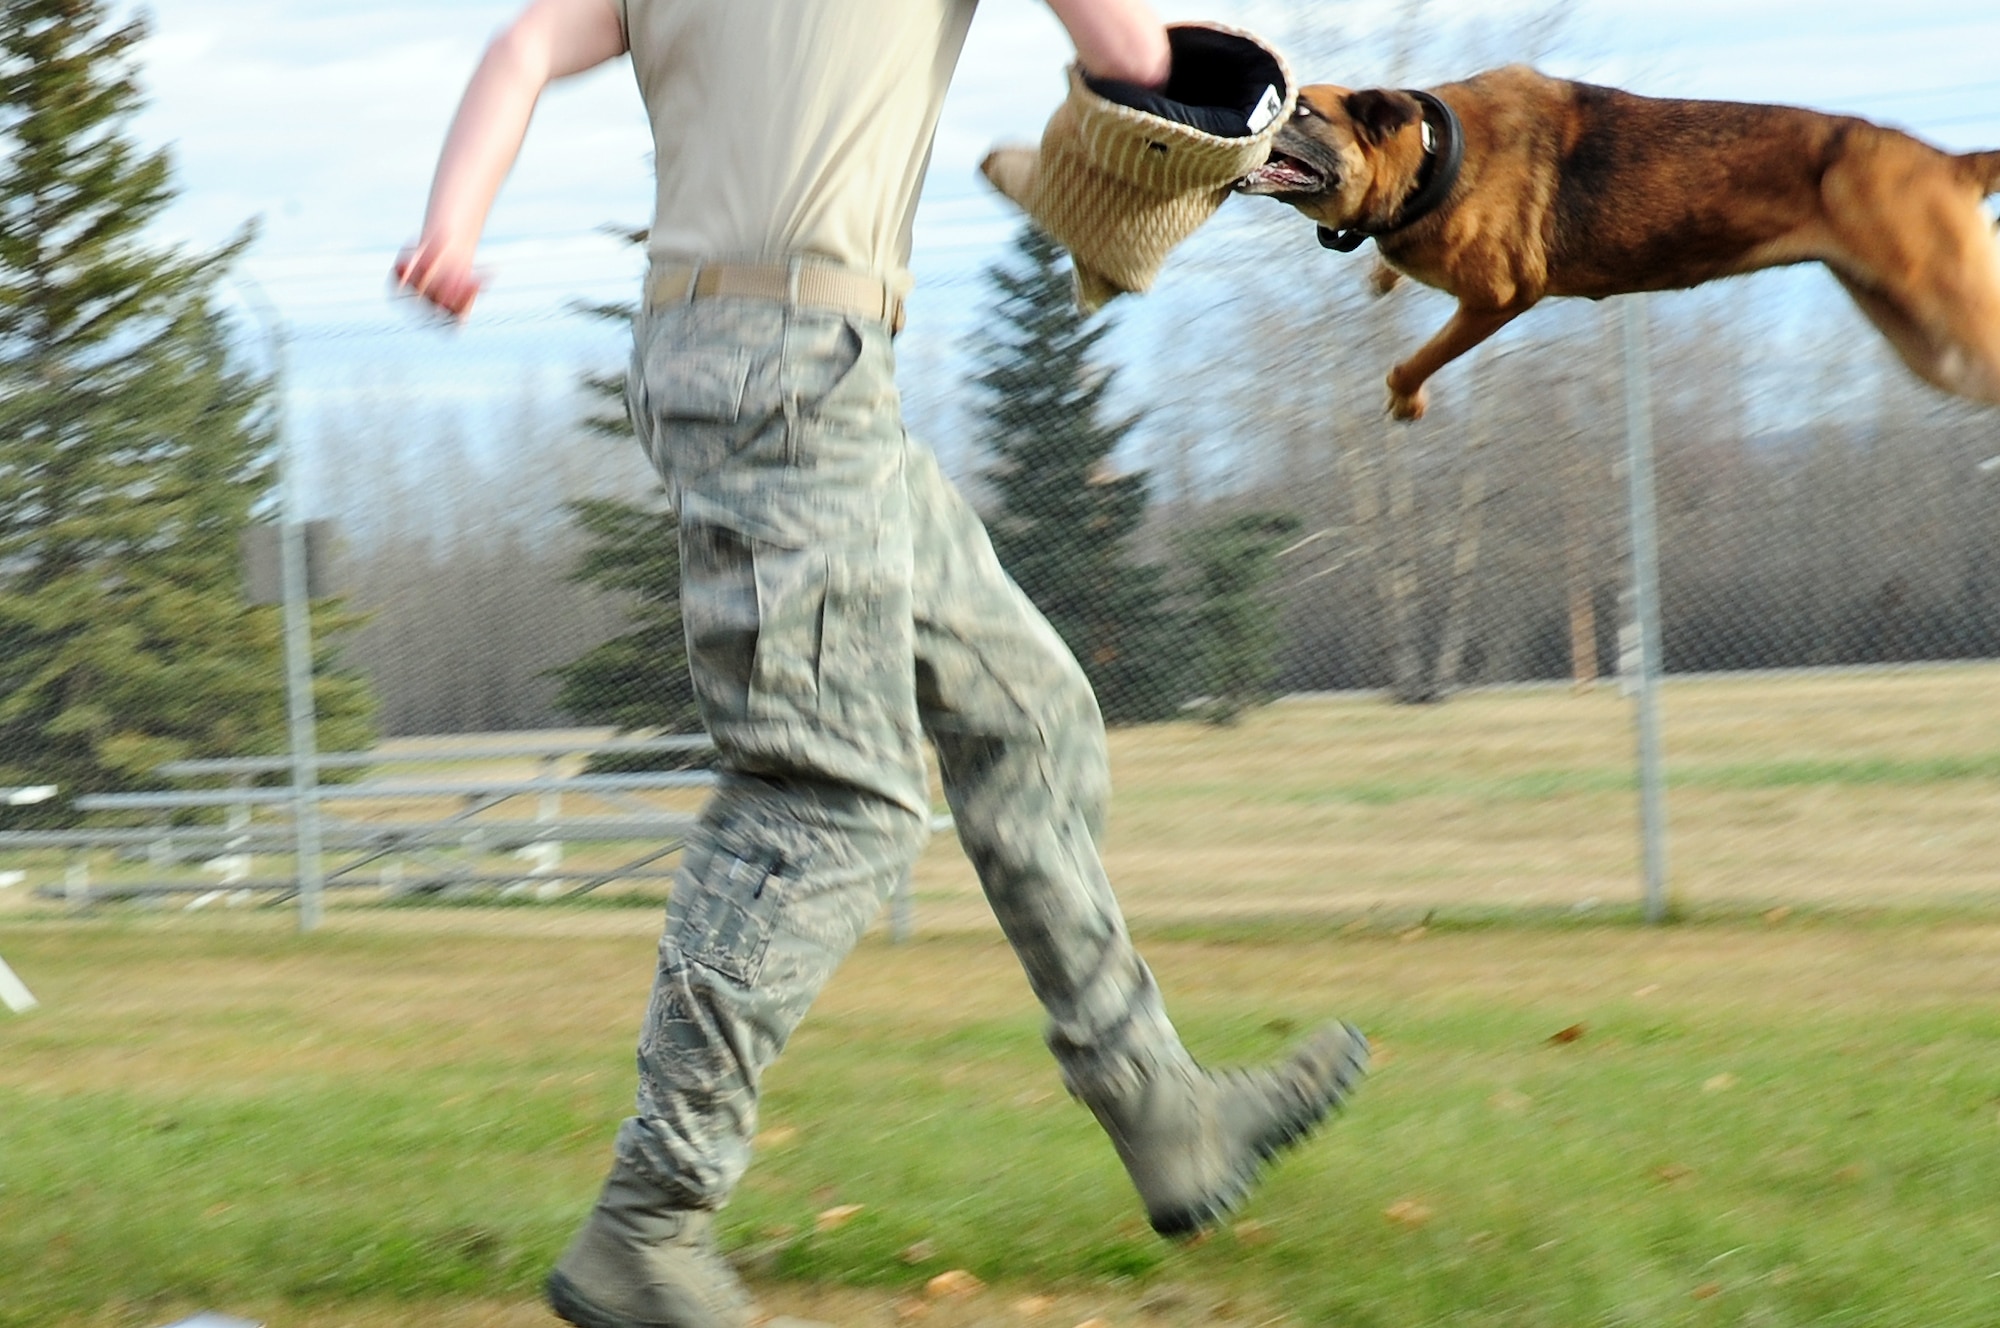 Azza, an 8-year-old Belgian Malinois, attacks a military working dog handler wearing a protective sleeve as part of a training exercise Oct. 4, 2012, Eielson Air Force Base, Alaska. Azza is assigned to the 354th Security Forces Squadron. (U.S. Air Force photo/Airman 1st Class Zachary Perras)